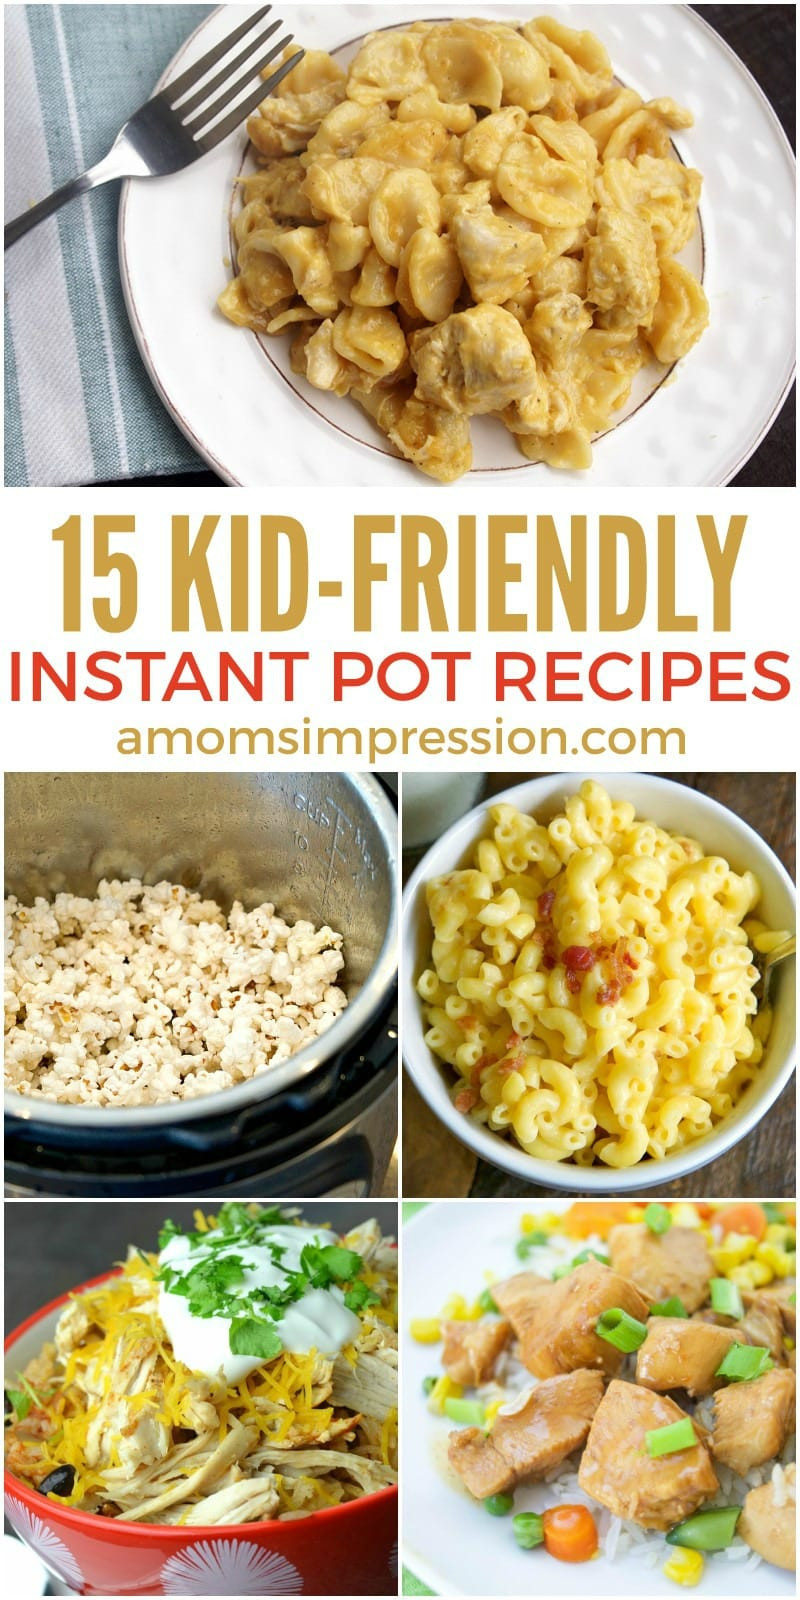 Kid Friendly Meals For Dinner
 15 Quick and Easy Kid Friendly Instant Pot Recipes